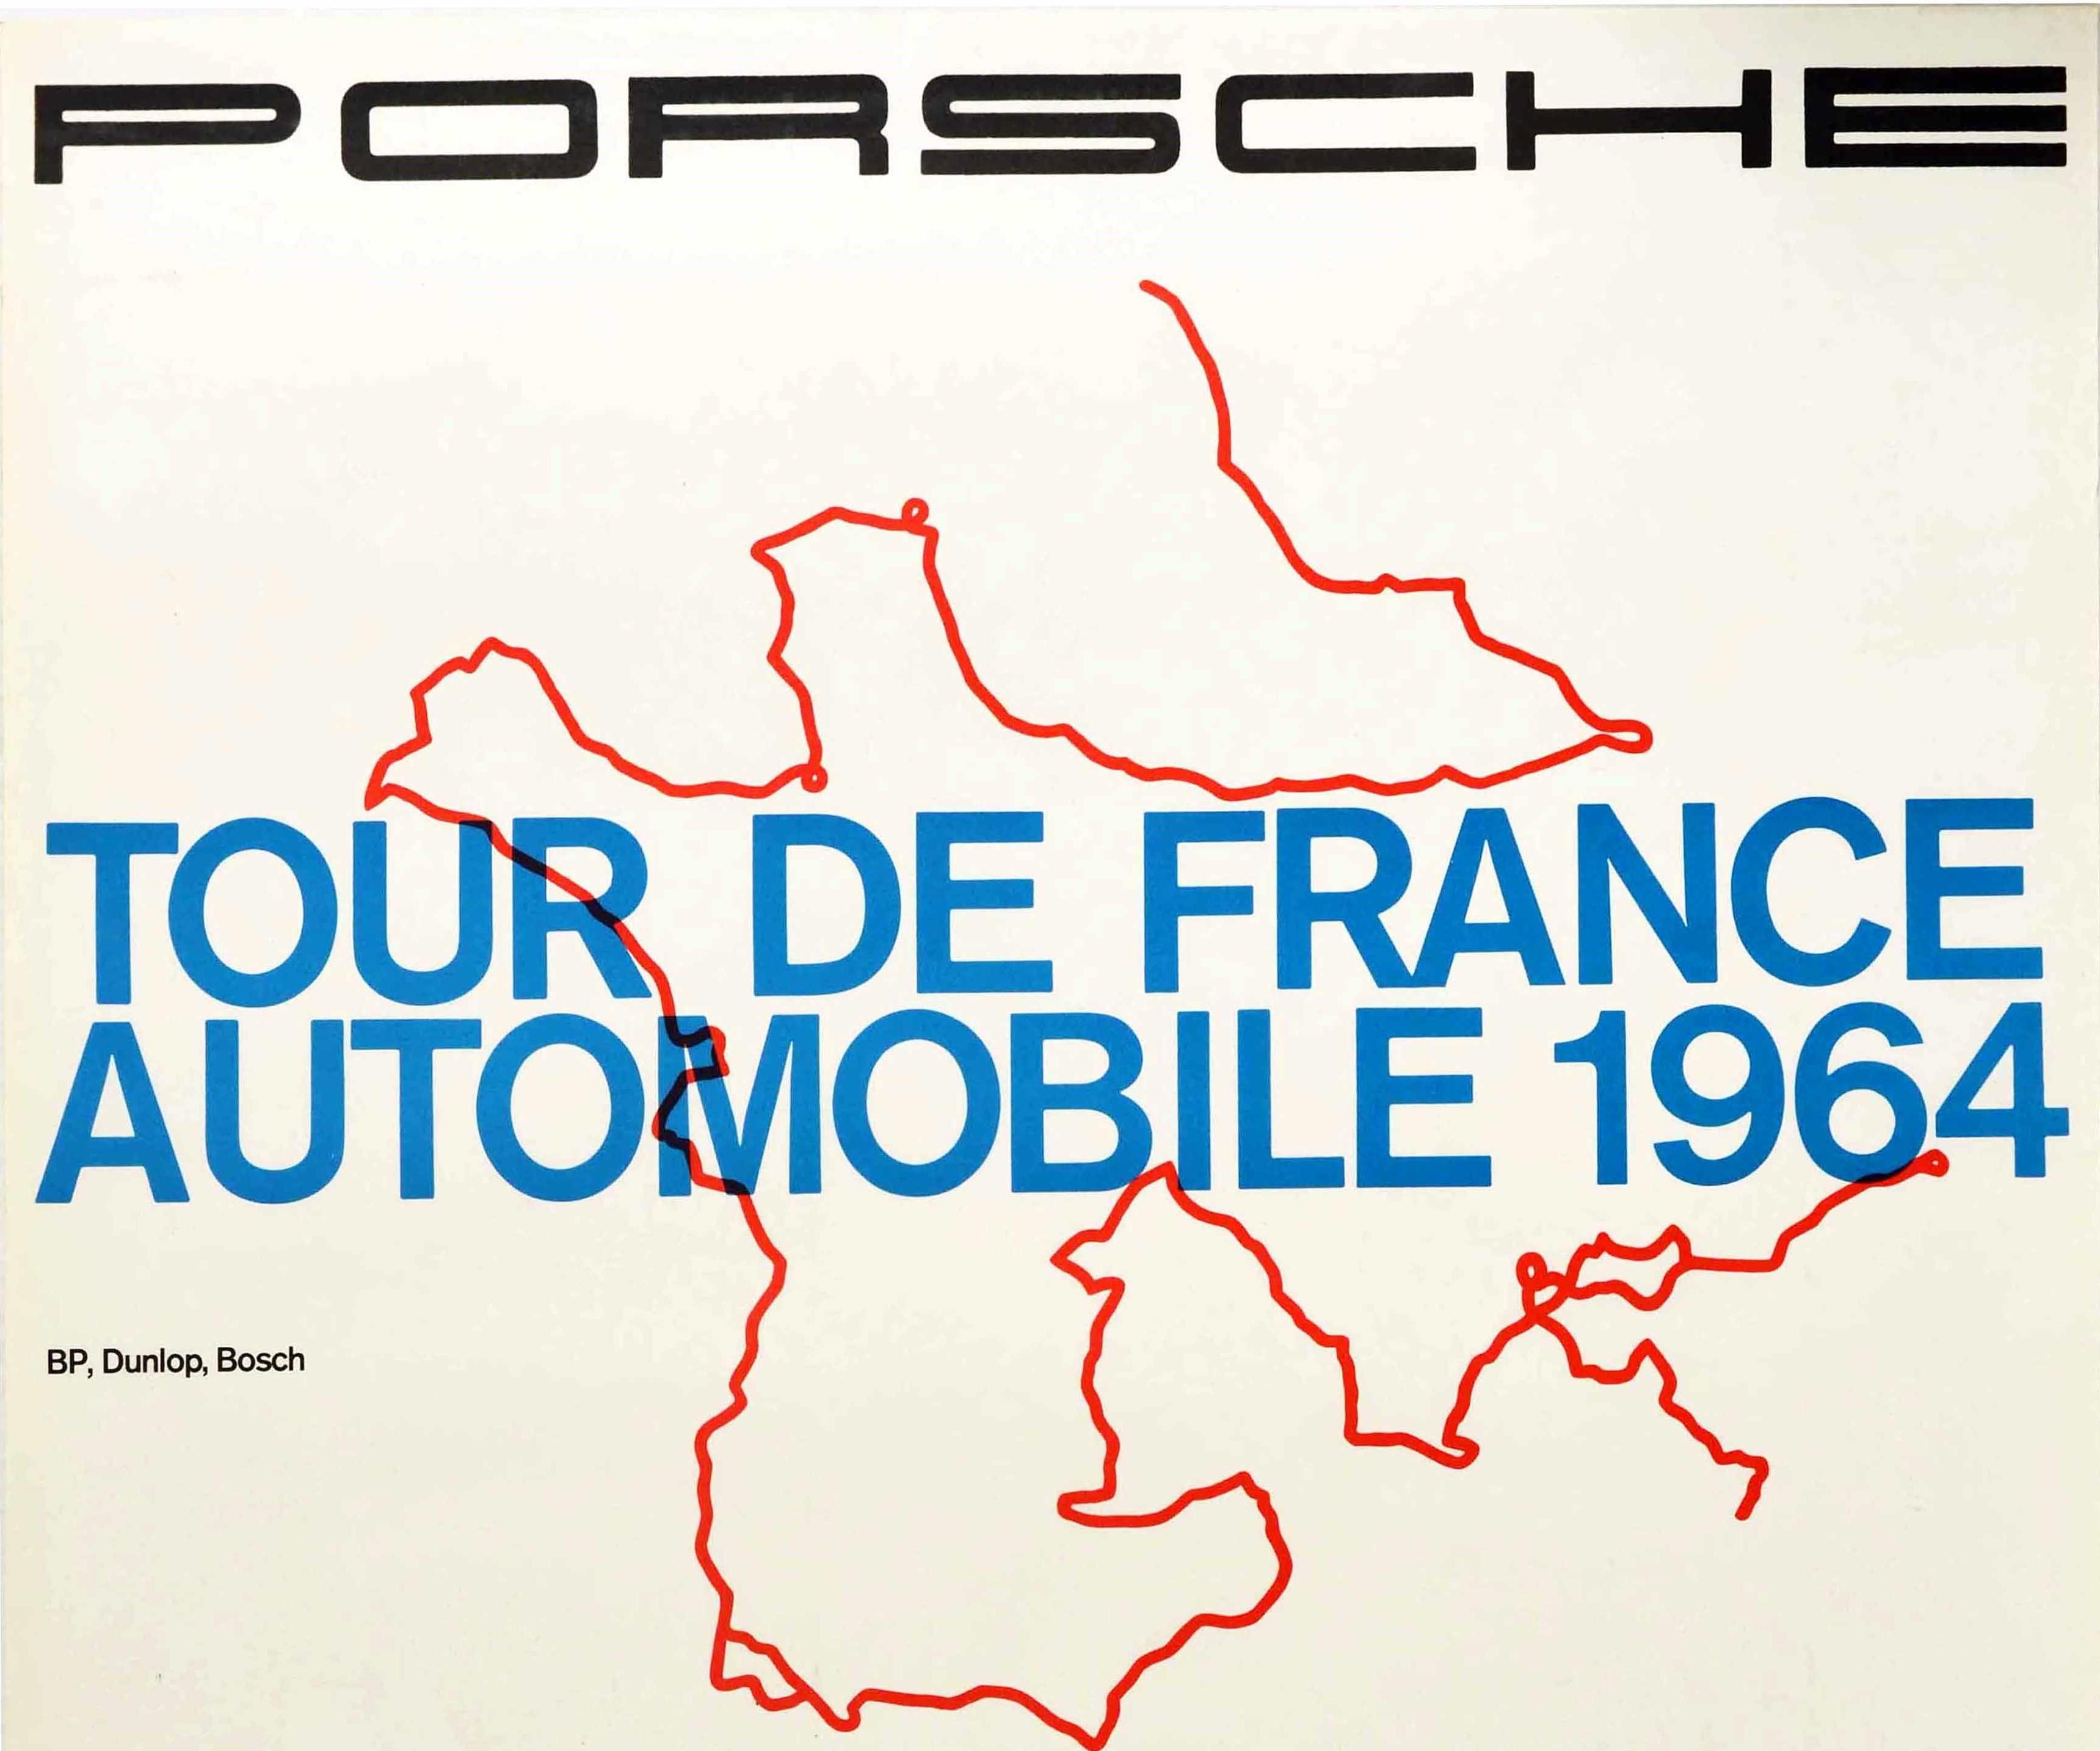 Original vintage motorsport poster for Porsche - Tour de France Automobile 1964 - featuring a black and white image of a Porsche 904 car numbered 44 below a red route map behind the bold blue lettering with the rest of the text in black, including